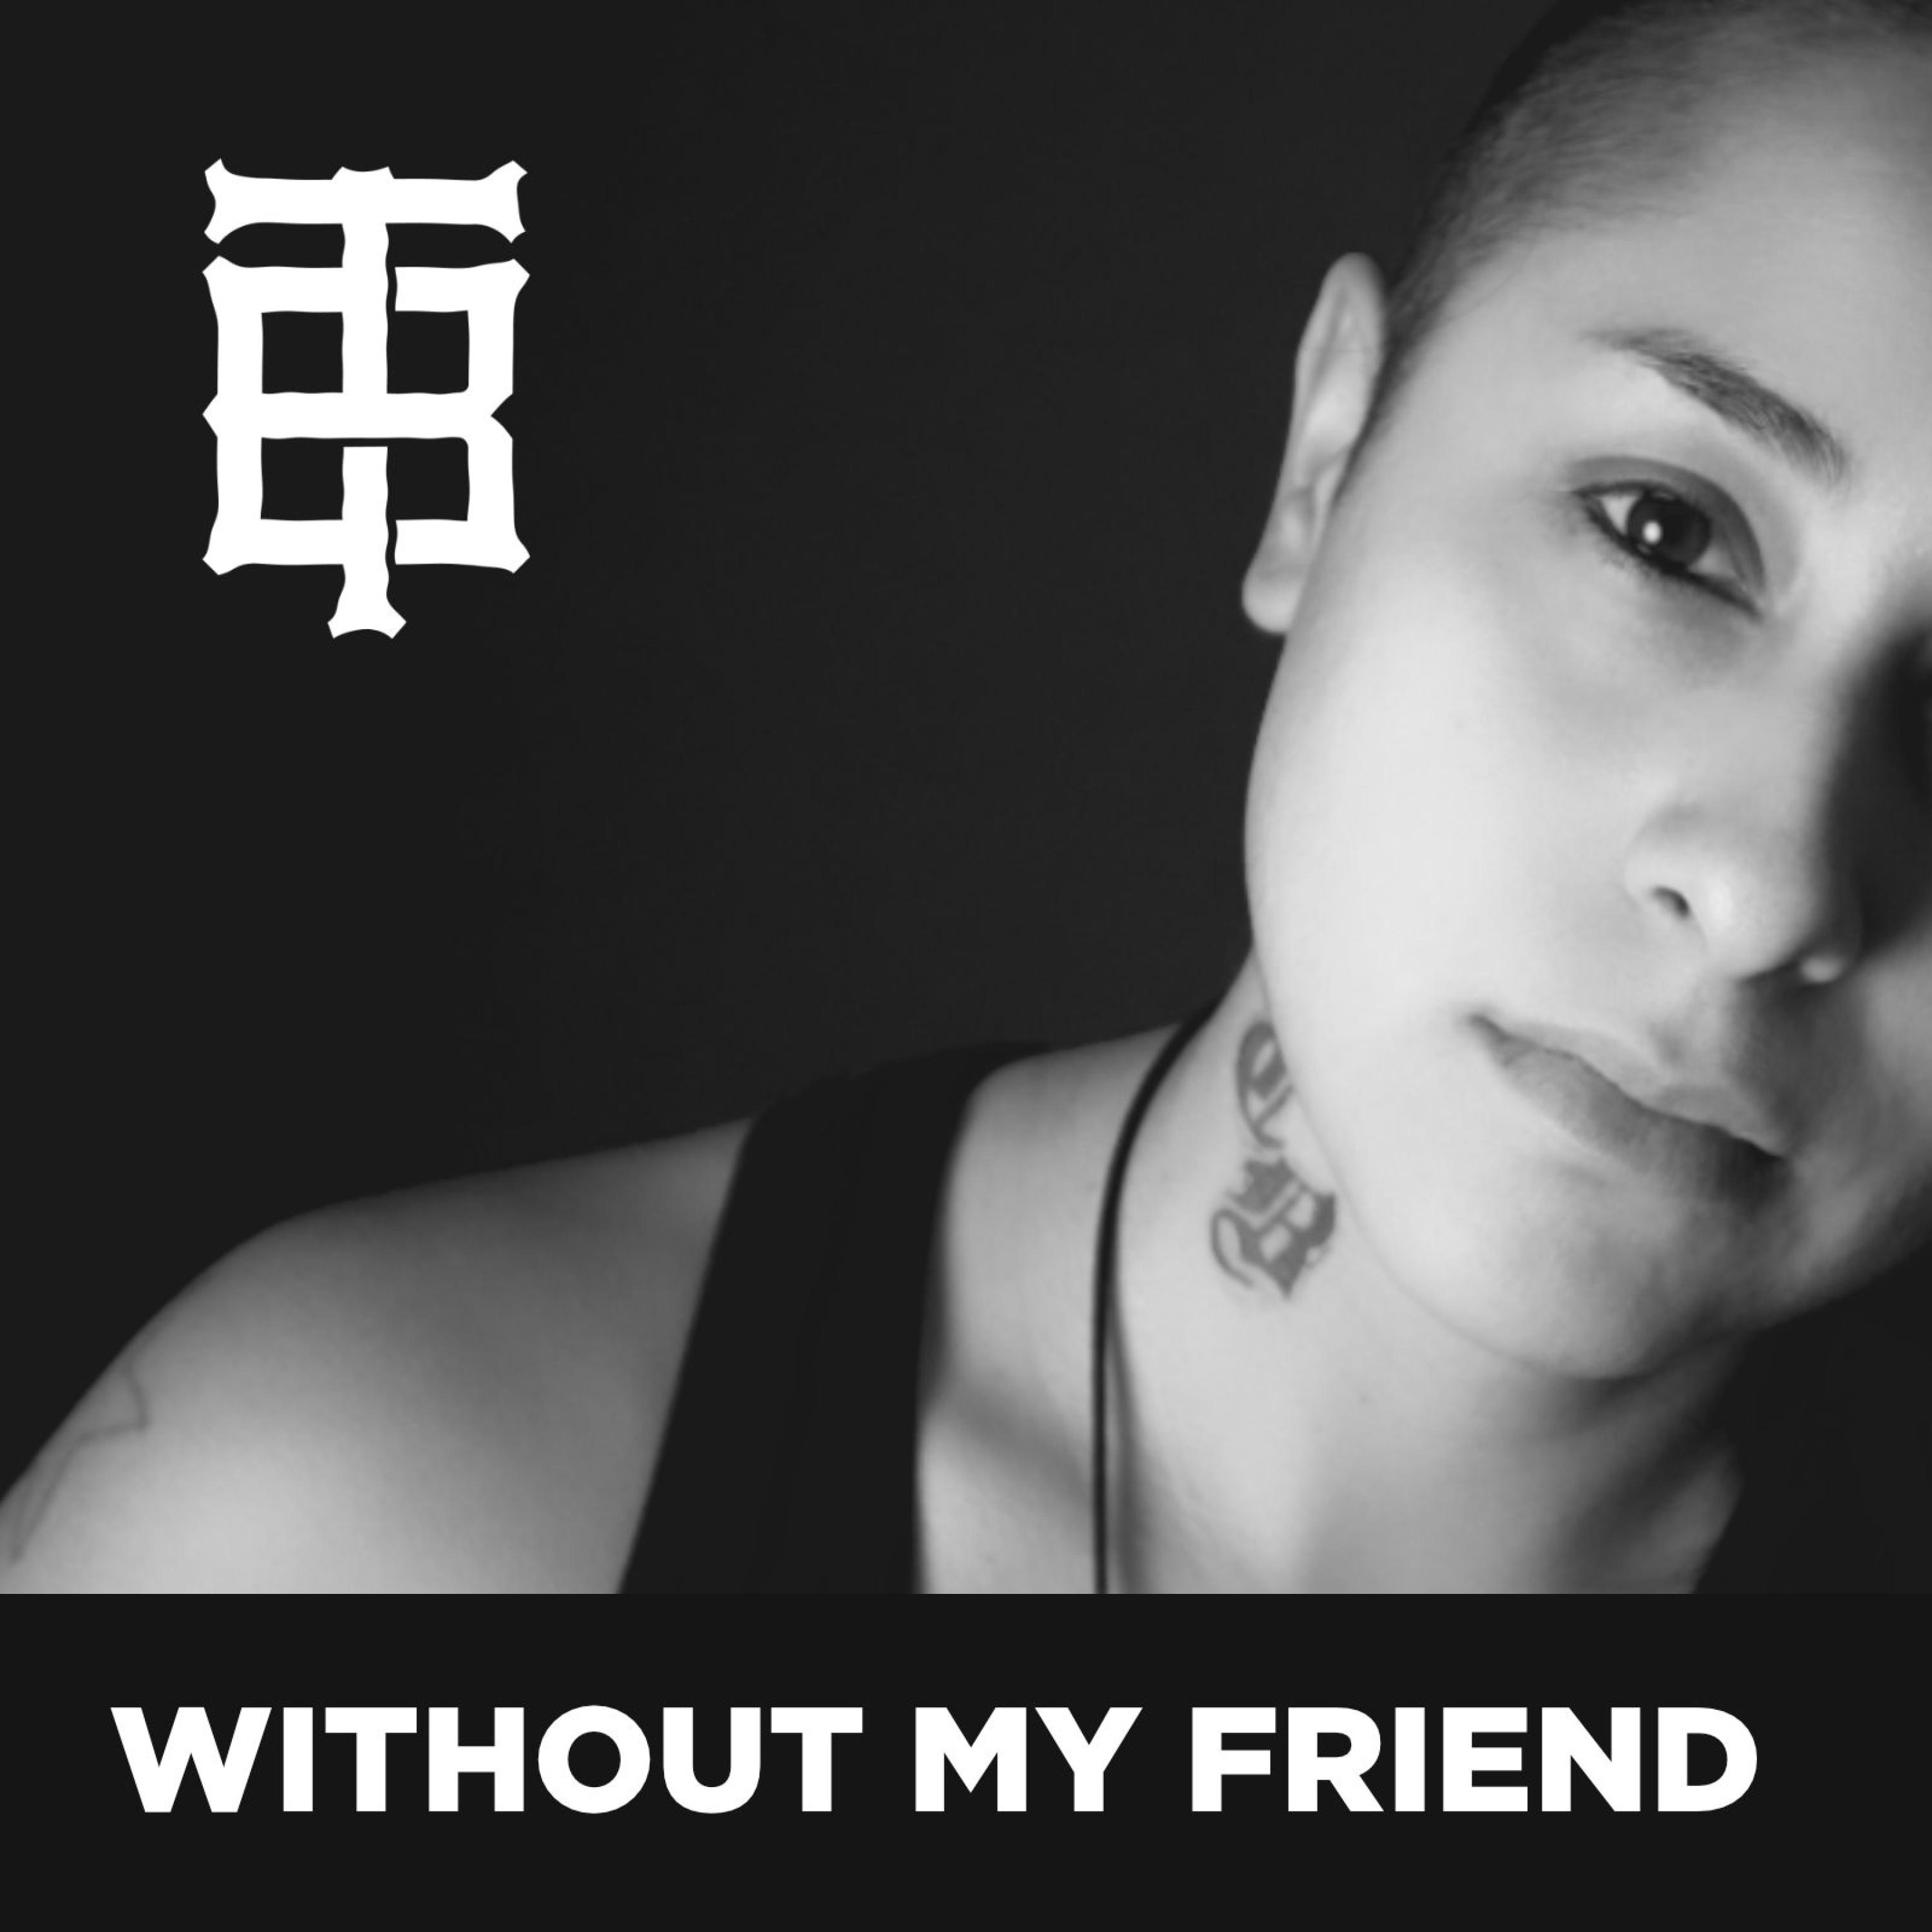 Without My Friend by Tori BLK